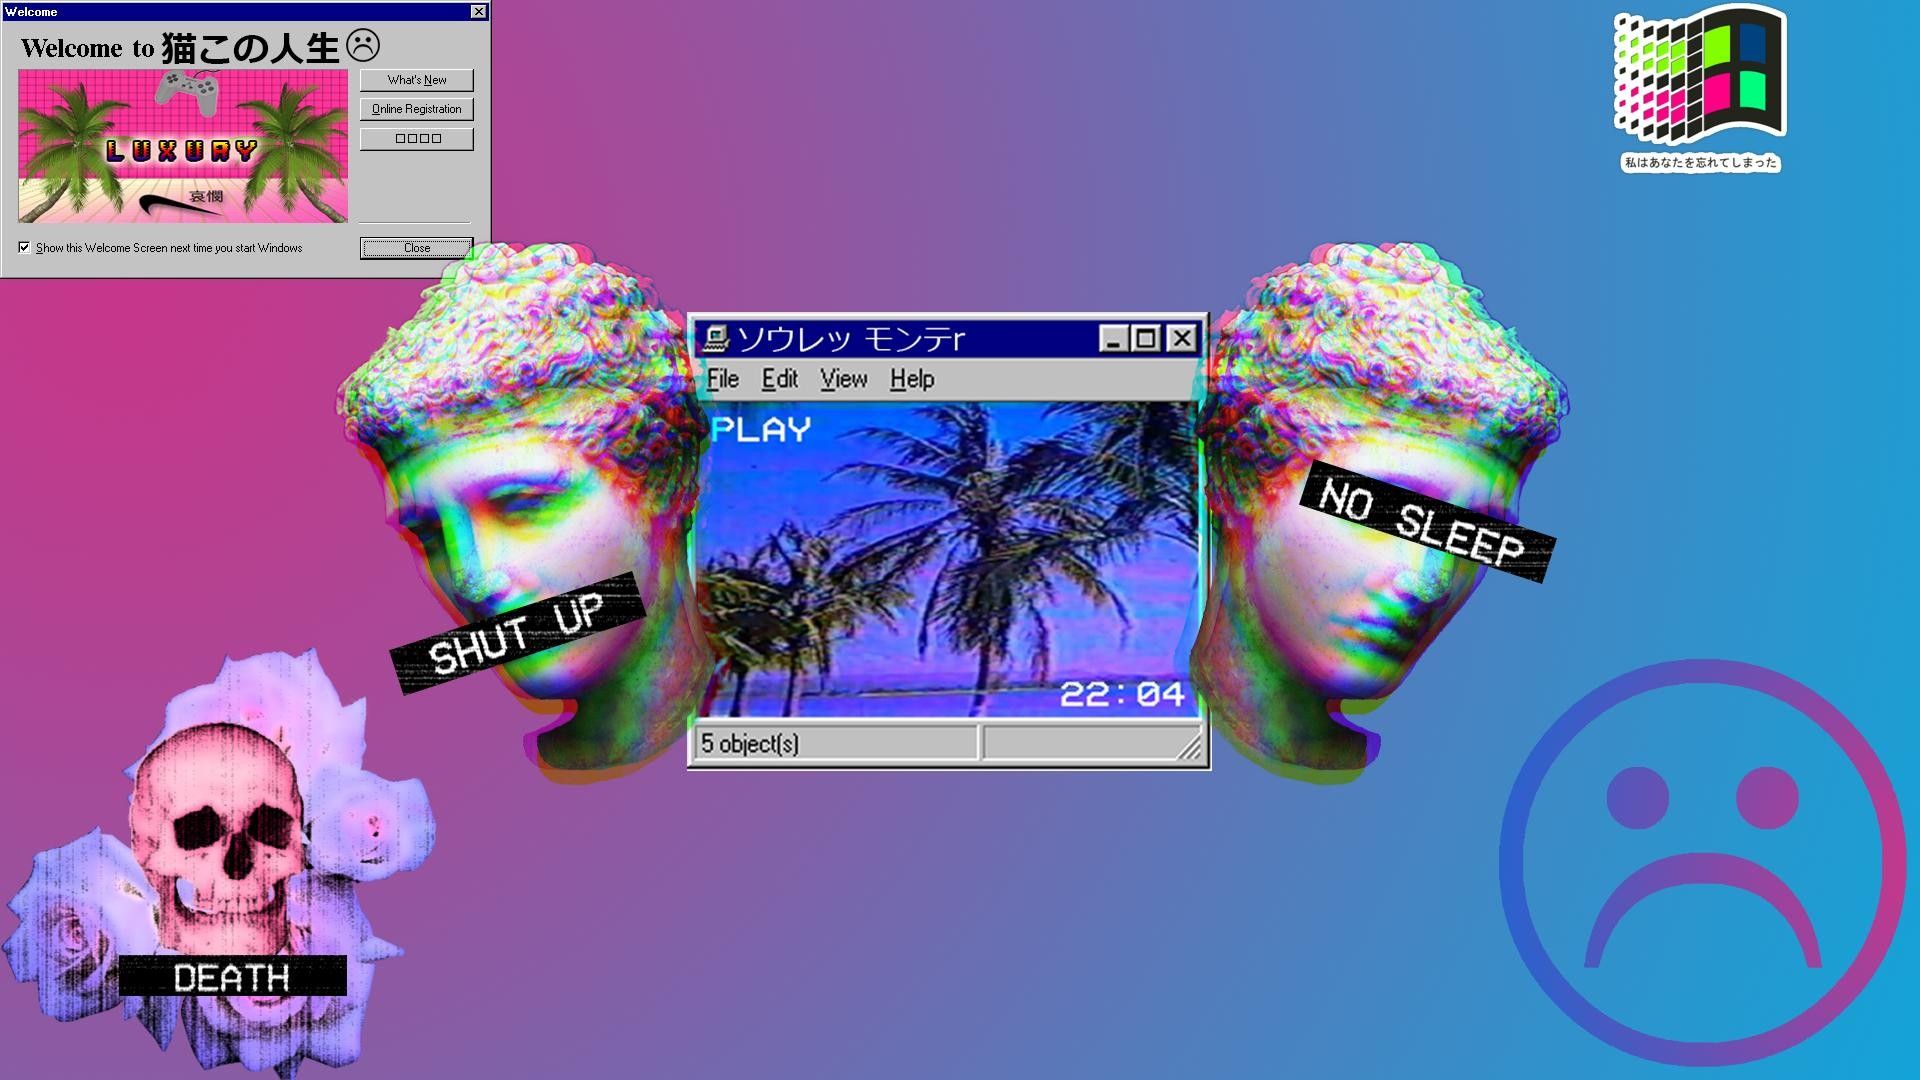 Vaporwave wallpaper 1920x1080Download free awesome full HD